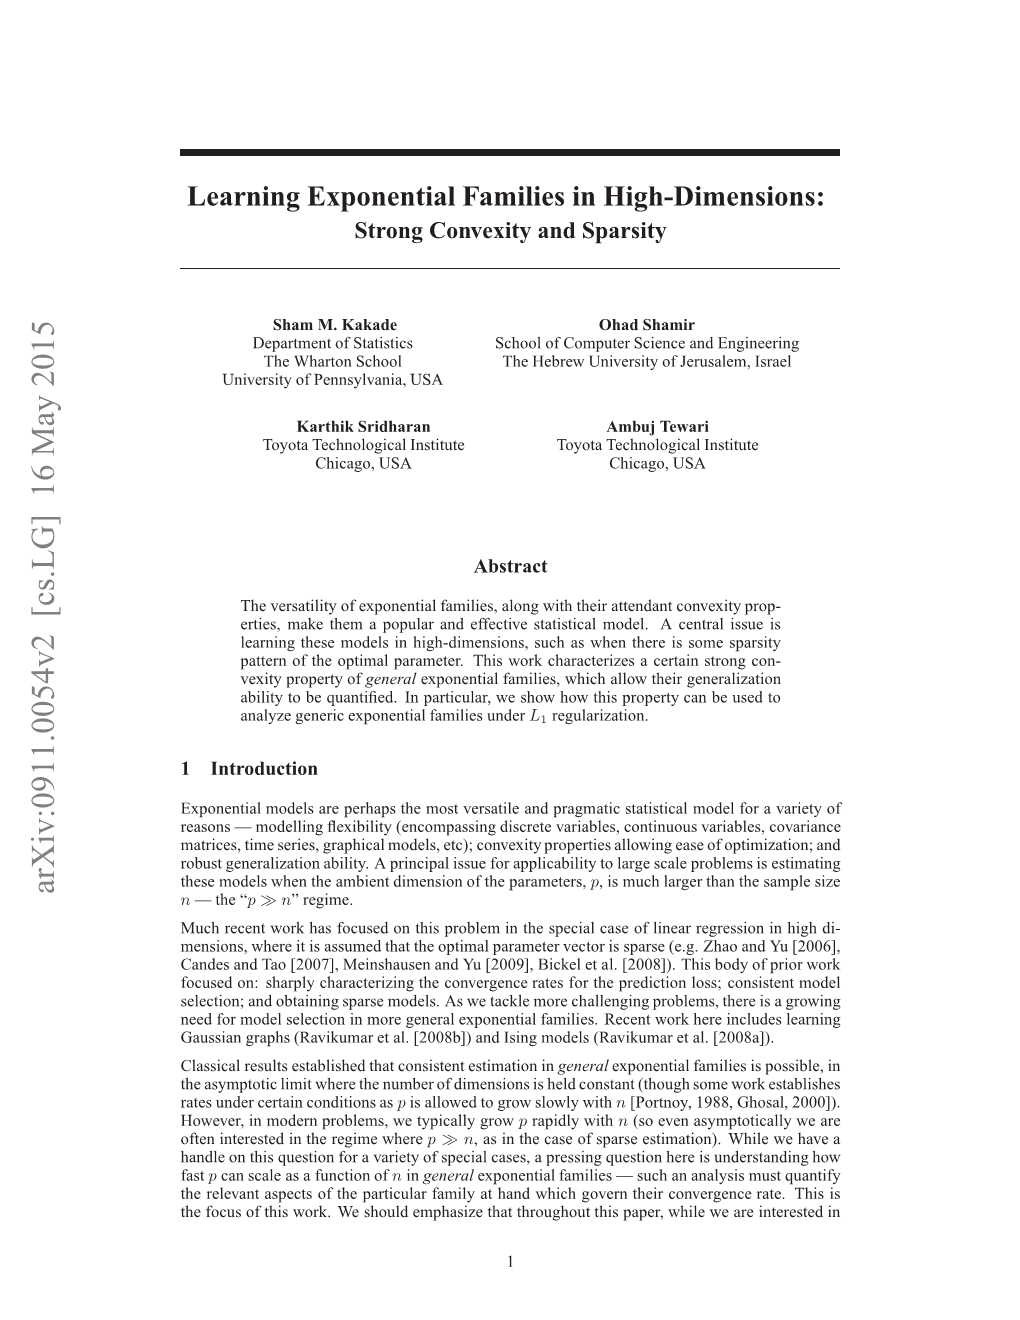 Learning Exponential Families in High-Dimensions